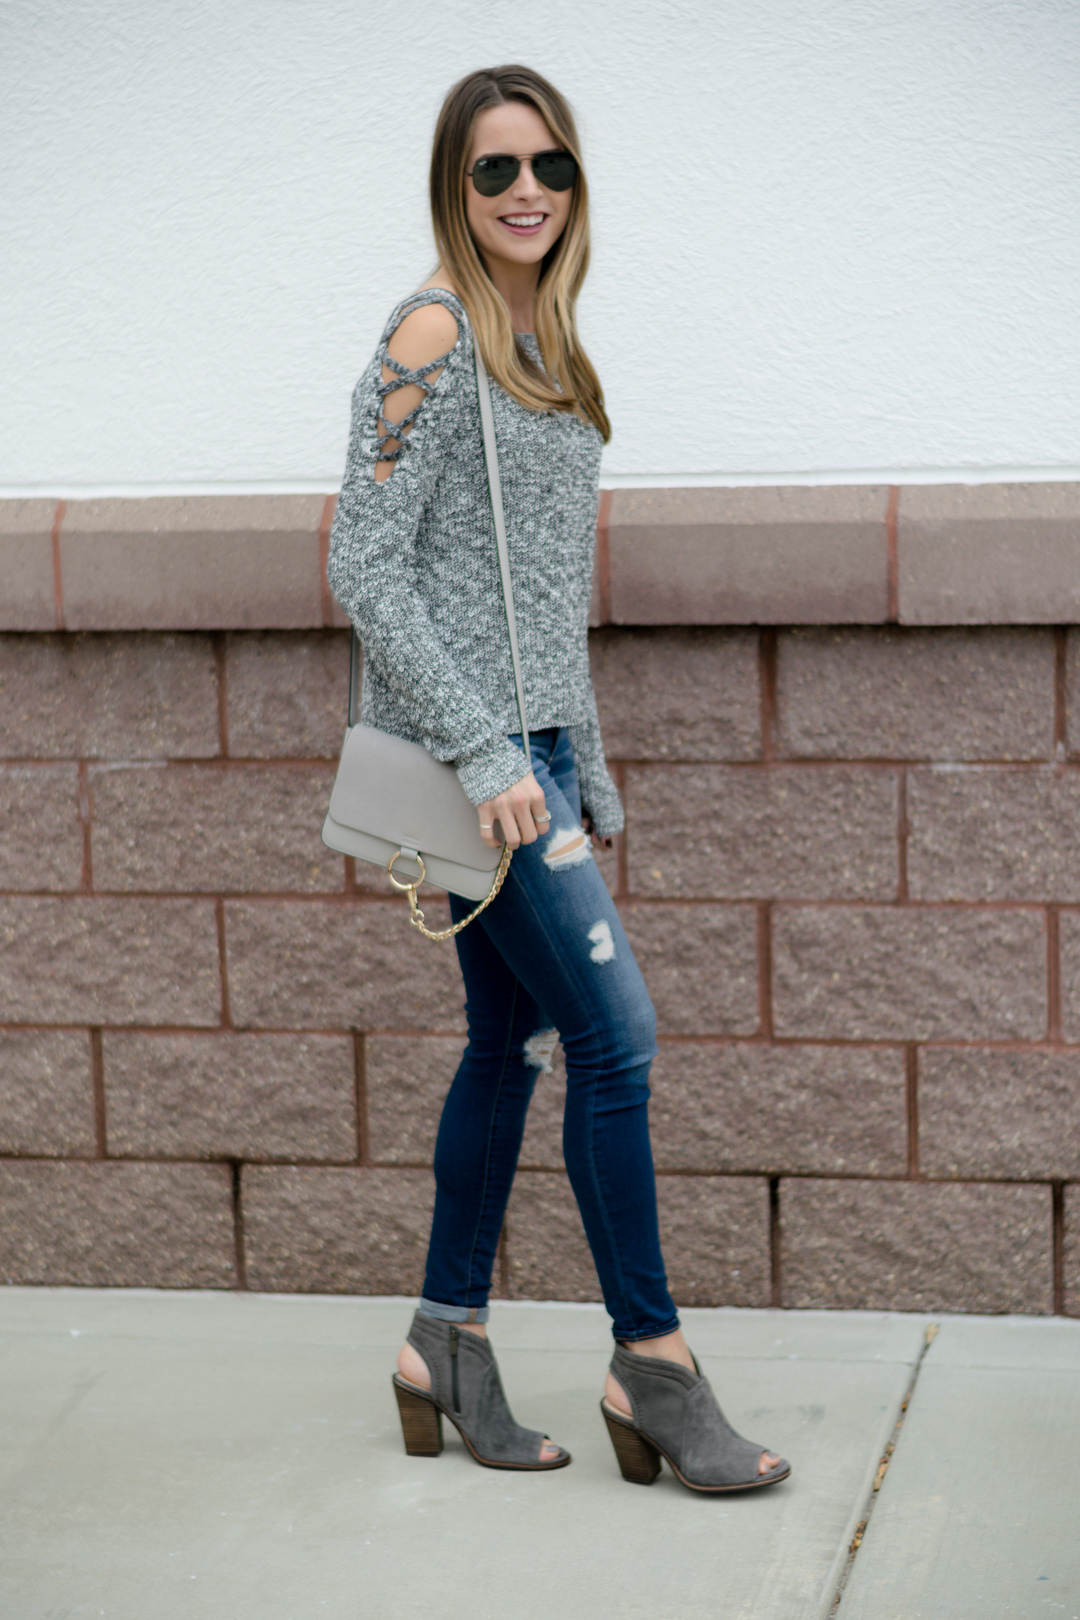 express lace up cold shoulder sweater, gray sweater outfit, peep toe booties, open toe booties, casual fall weekend outfit